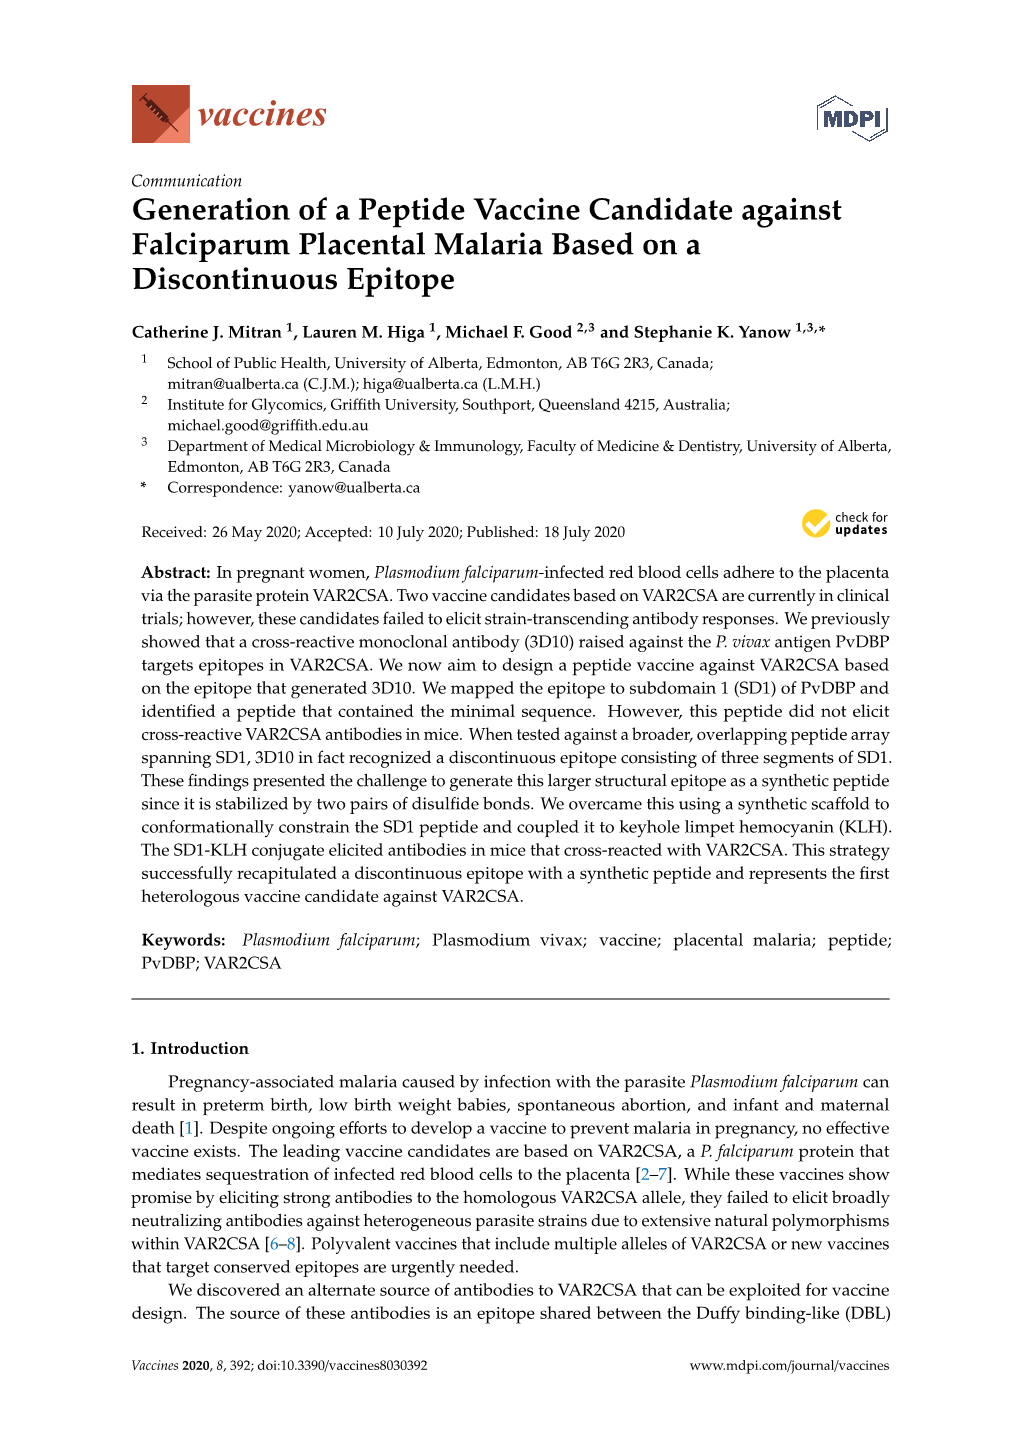 Generation of a Peptide Vaccine Candidate Against Falciparum Placental Malaria Based on a Discontinuous Epitope